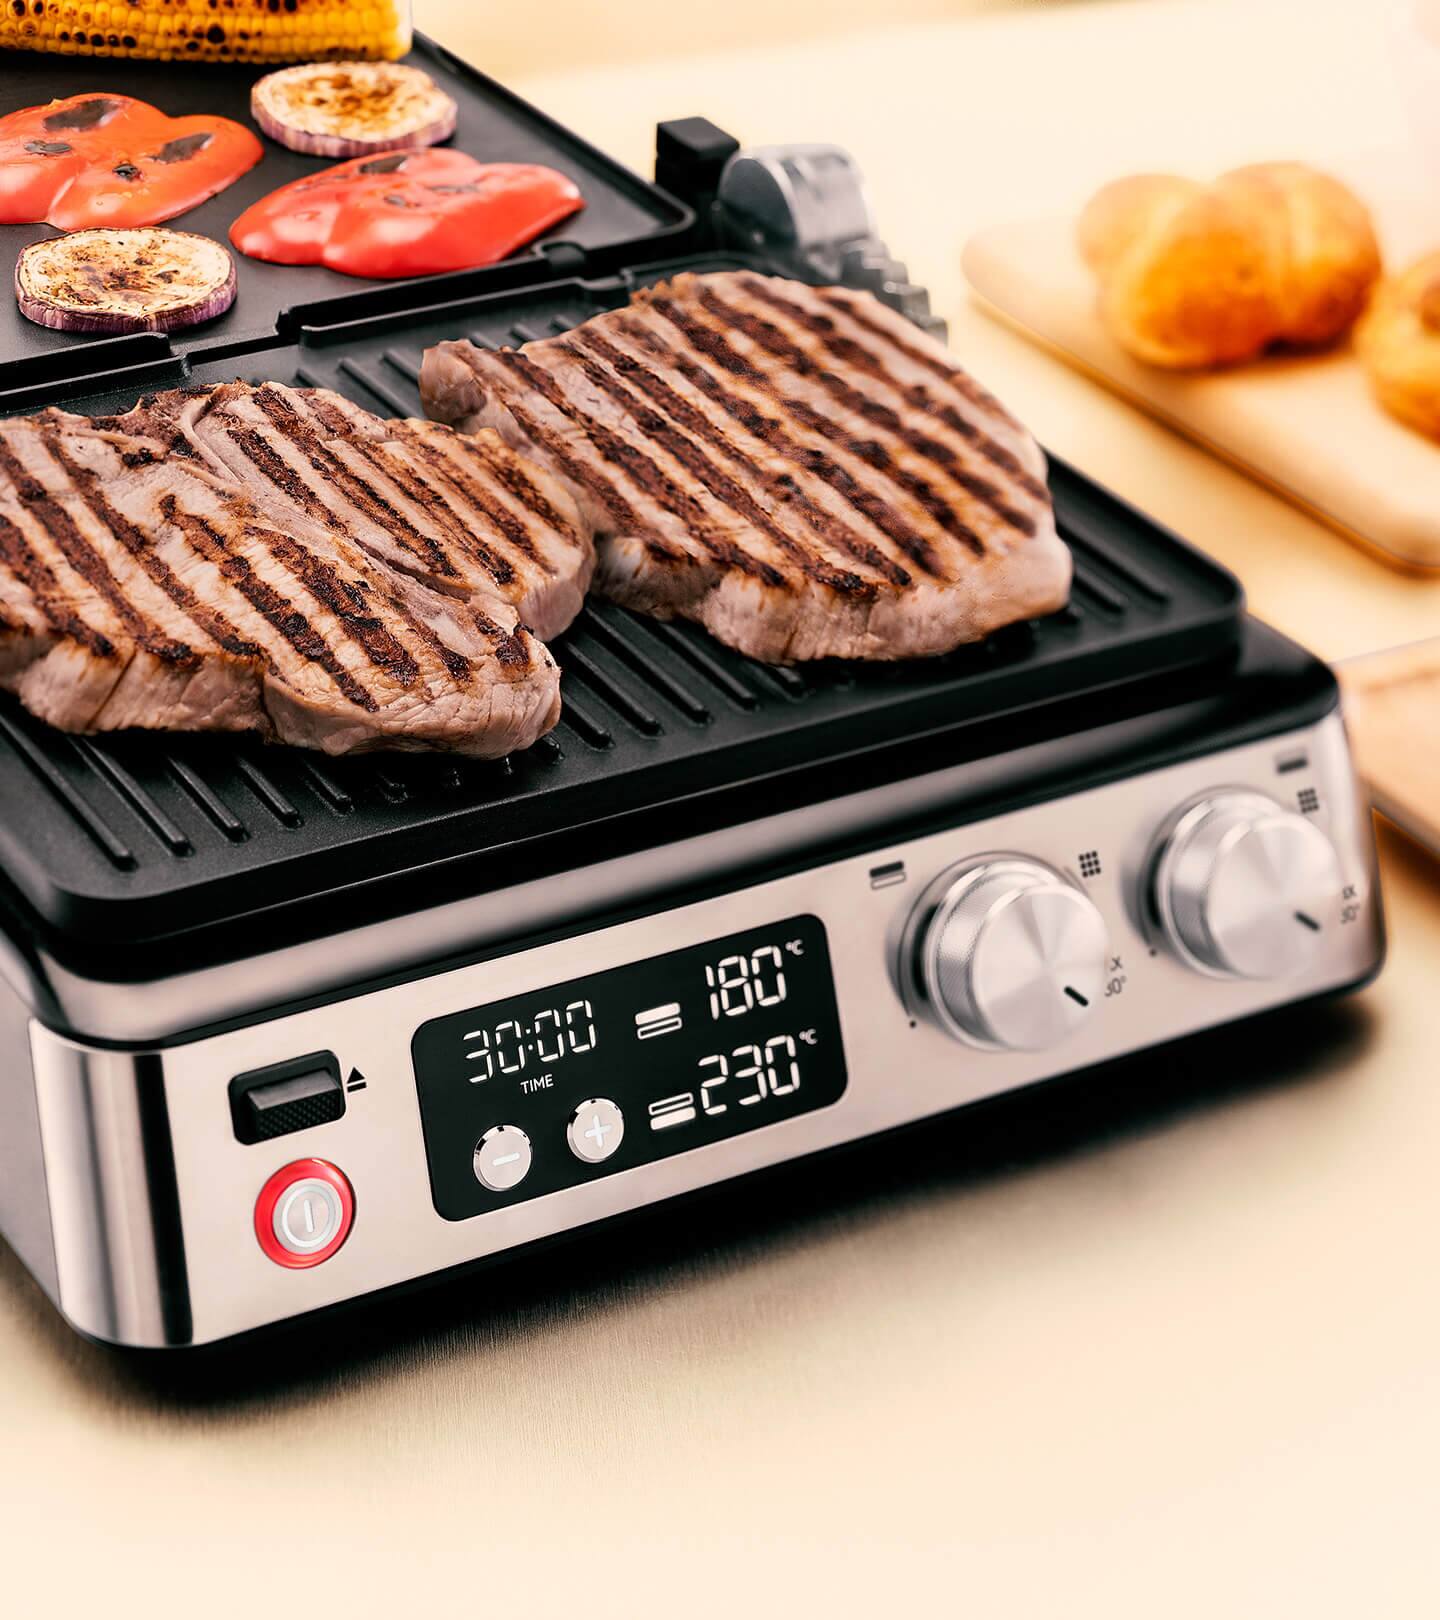 Braun MultiGrill 7 with independent electronic temperature controls